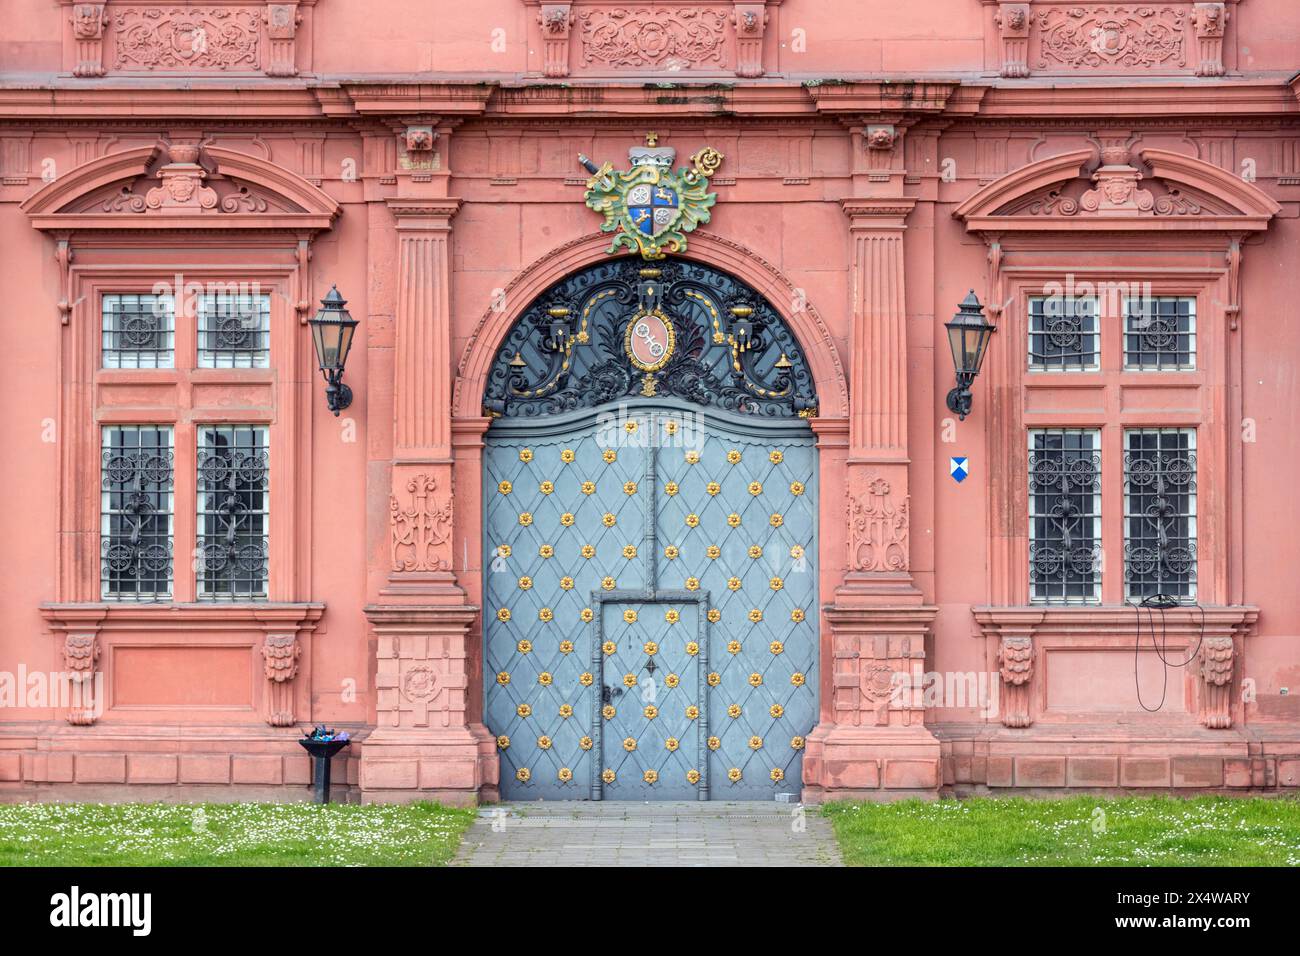 Facade with ornamented gate of the Electoral Palace of Mainz, an important example of renaissance architecture in Germany. Stock Photo